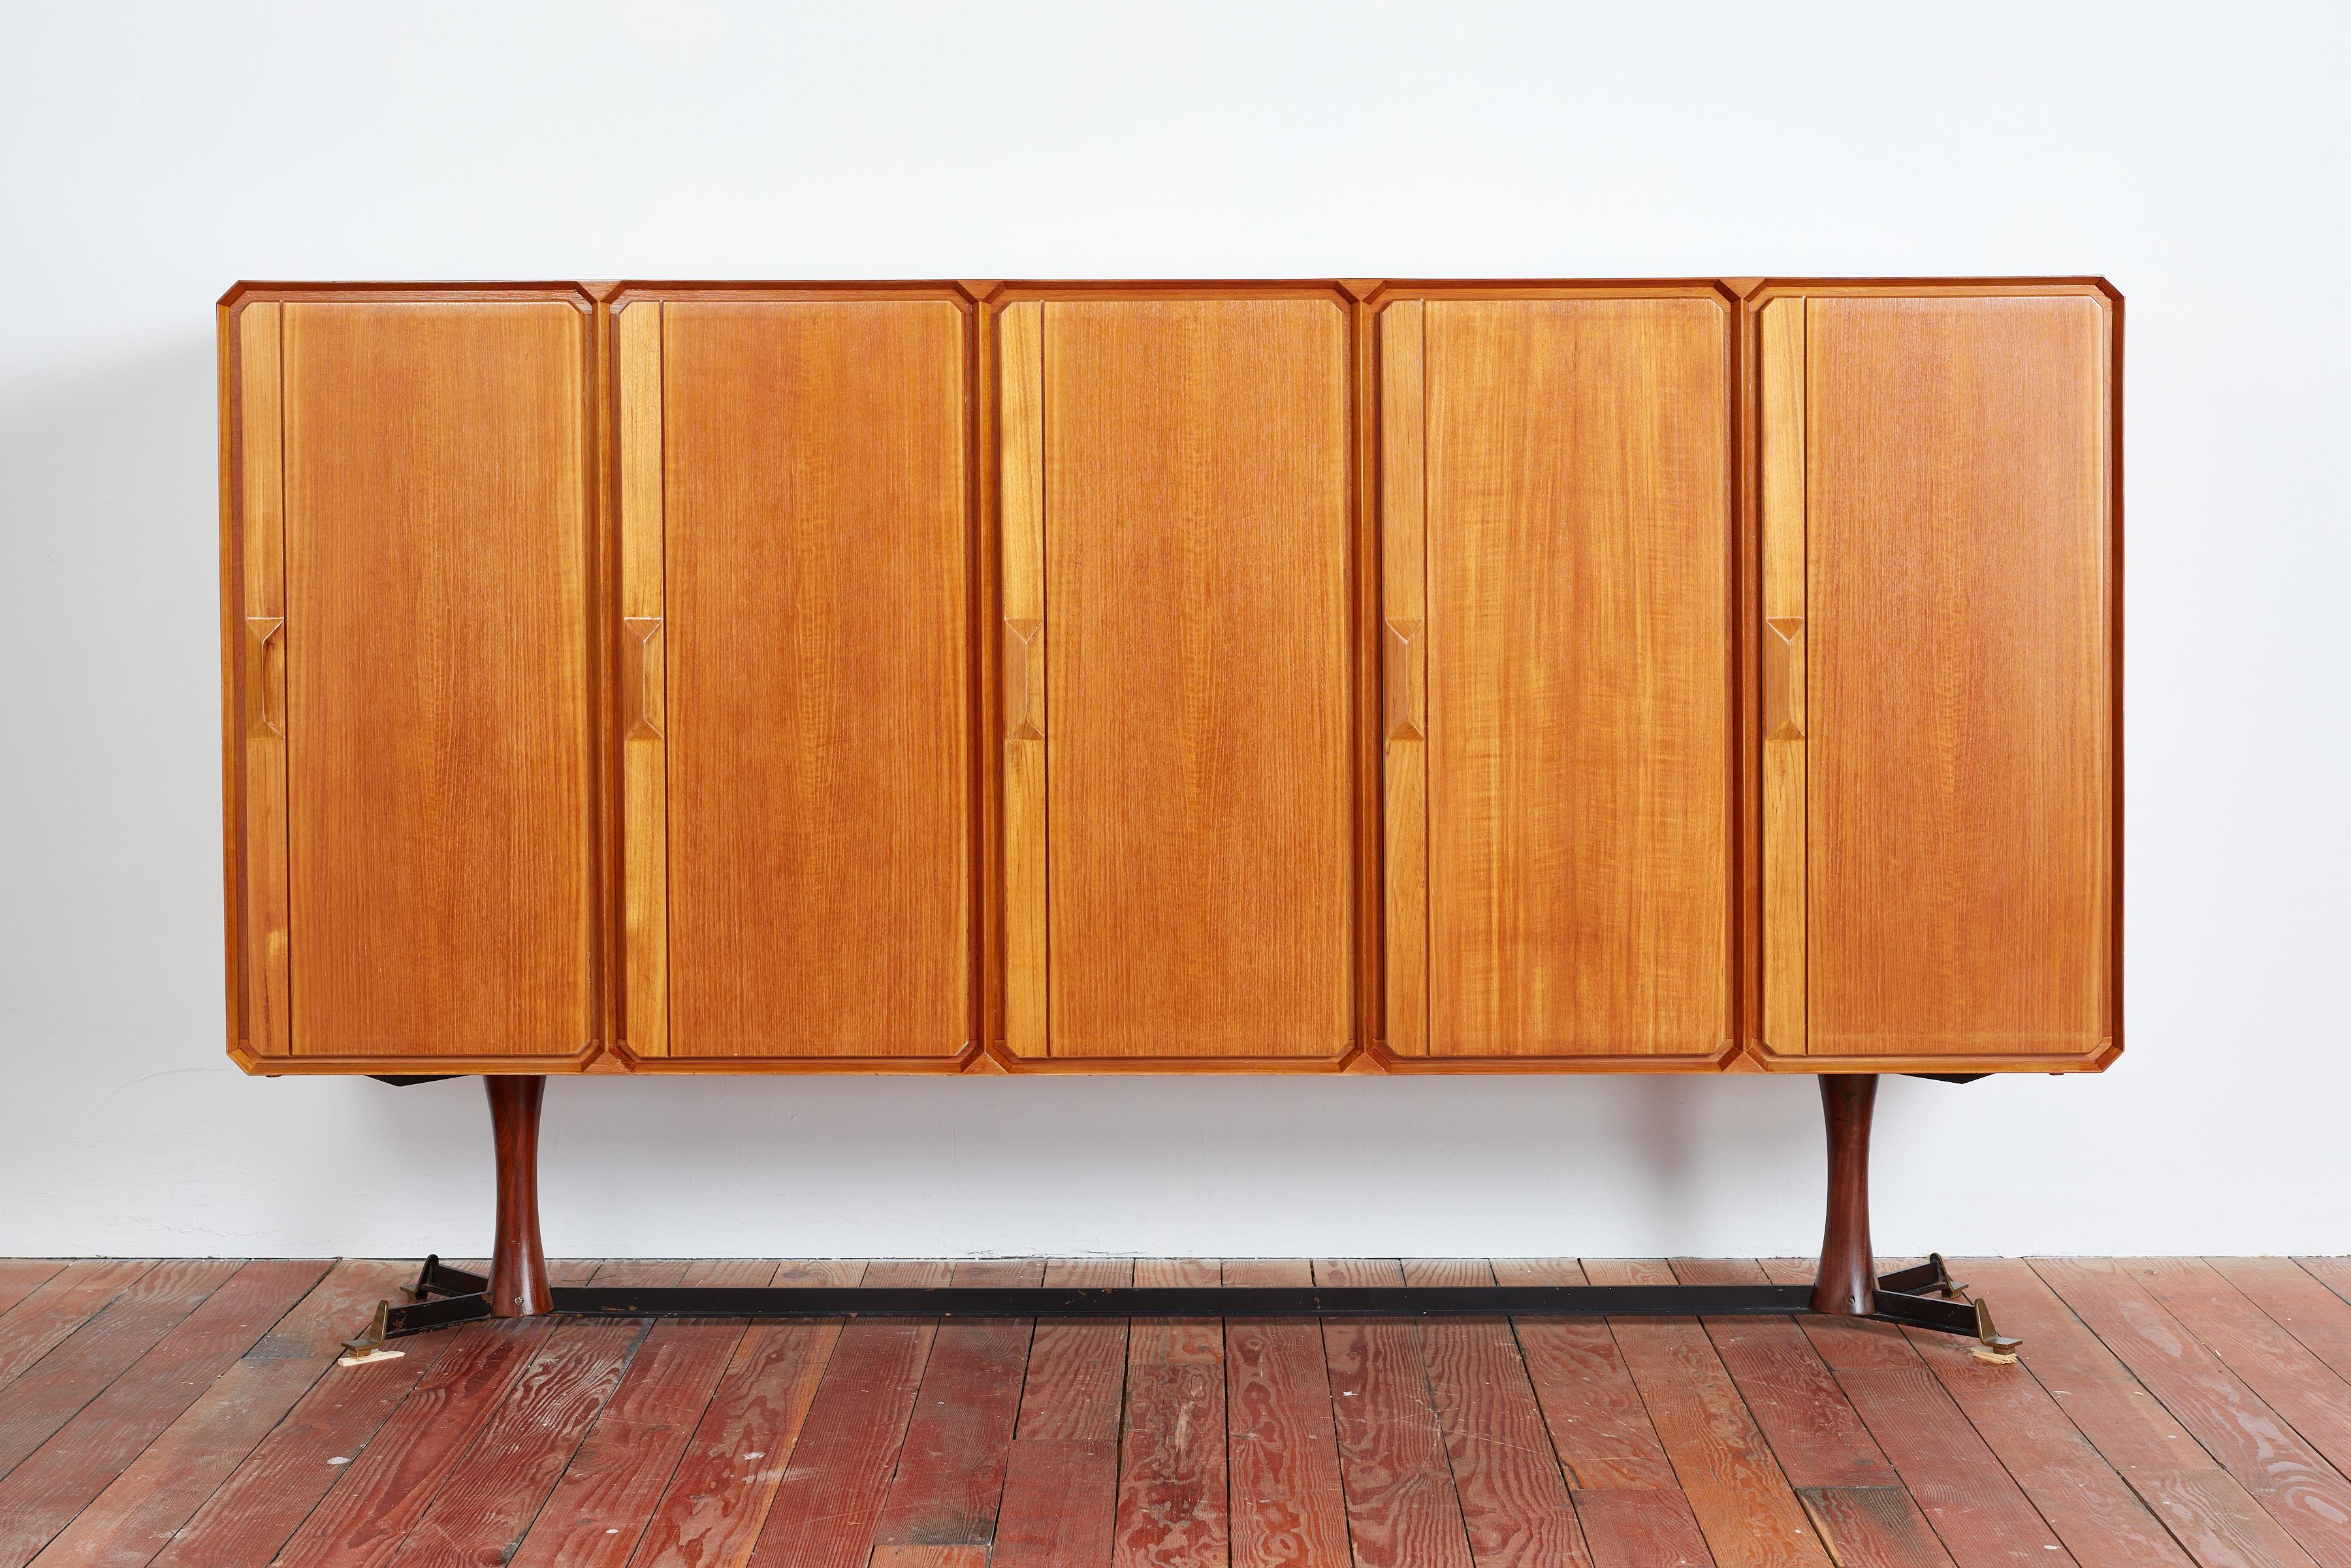 Gigantic sideboard manufactured by Galleria Mobili d'Arte in Cantù, Italy, during the 1950s.
Constructed of teak wood, metal with brass - 
Original label 
All 5 doors open to reveal open shelving and drawers in center cabinet 
Suspended on wood